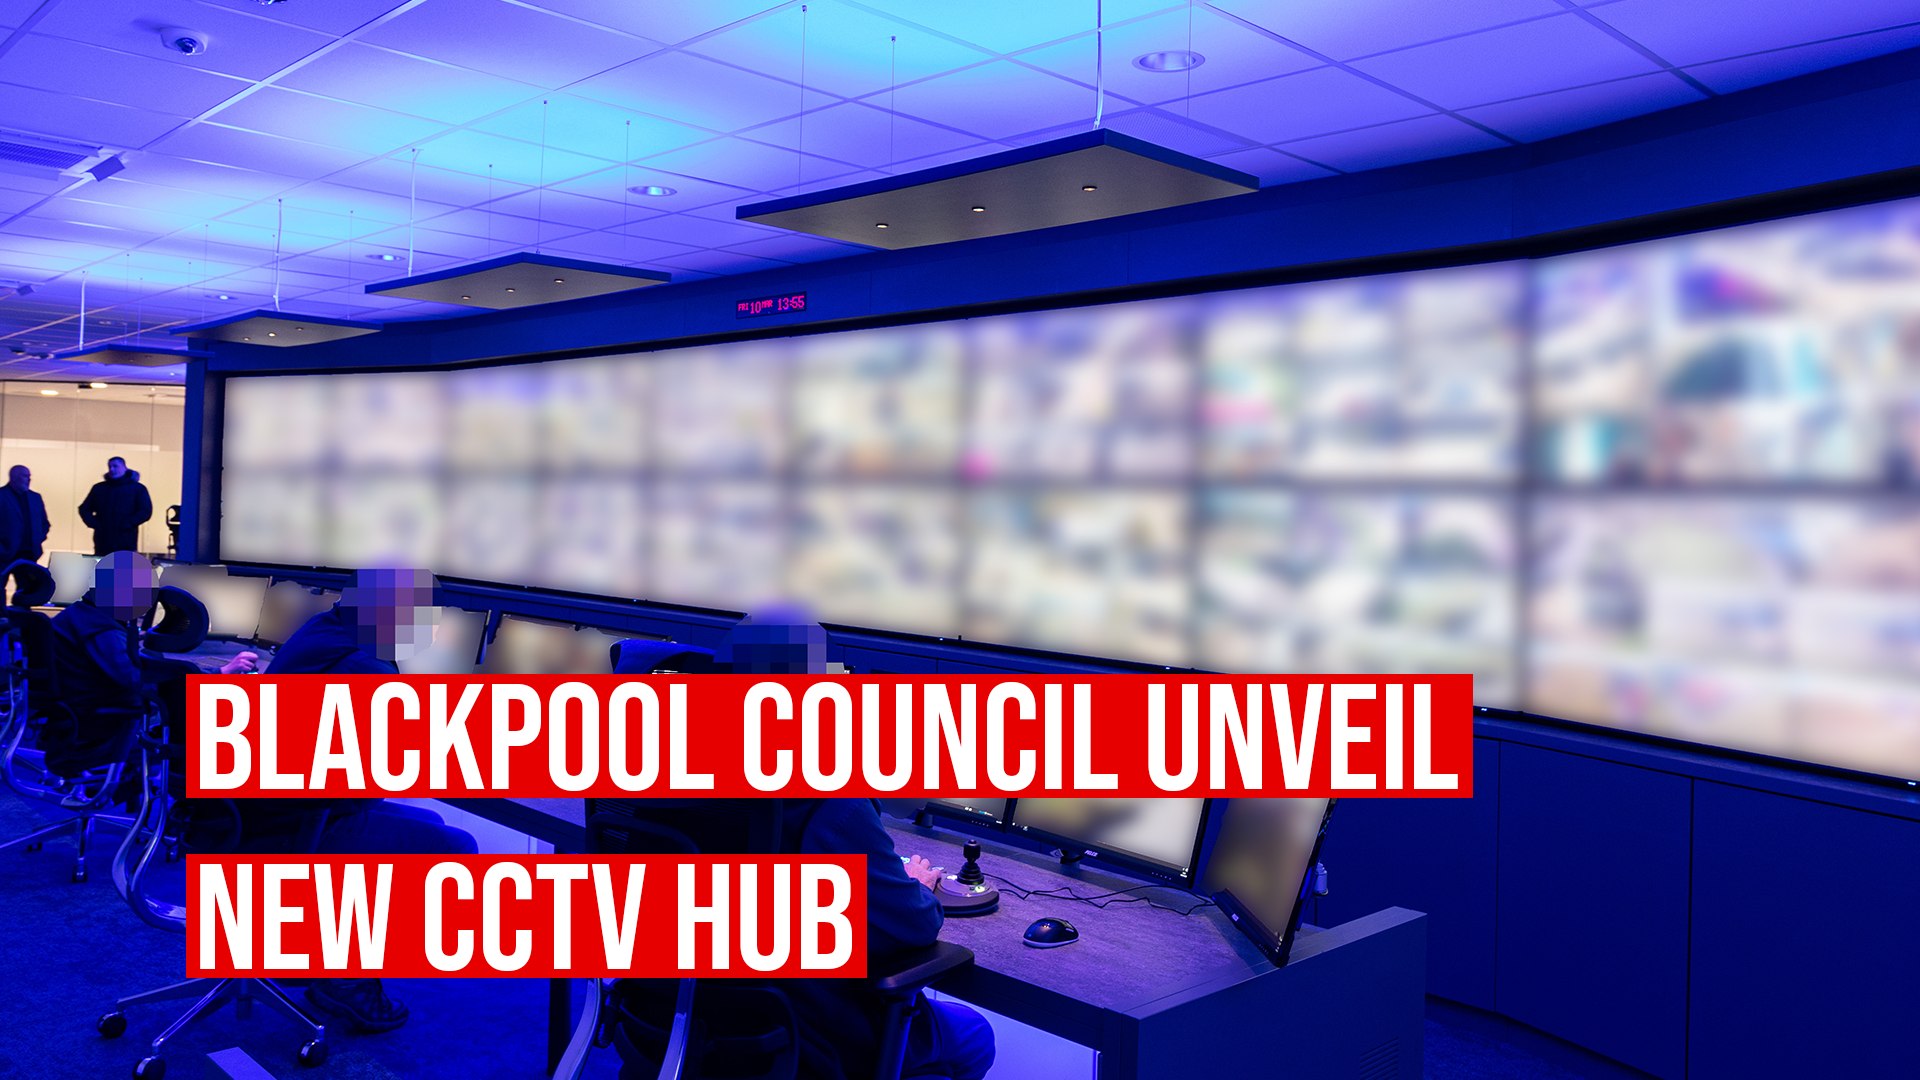 We take a look around Blackpool Council's new CCTV hub - video Dailymotion